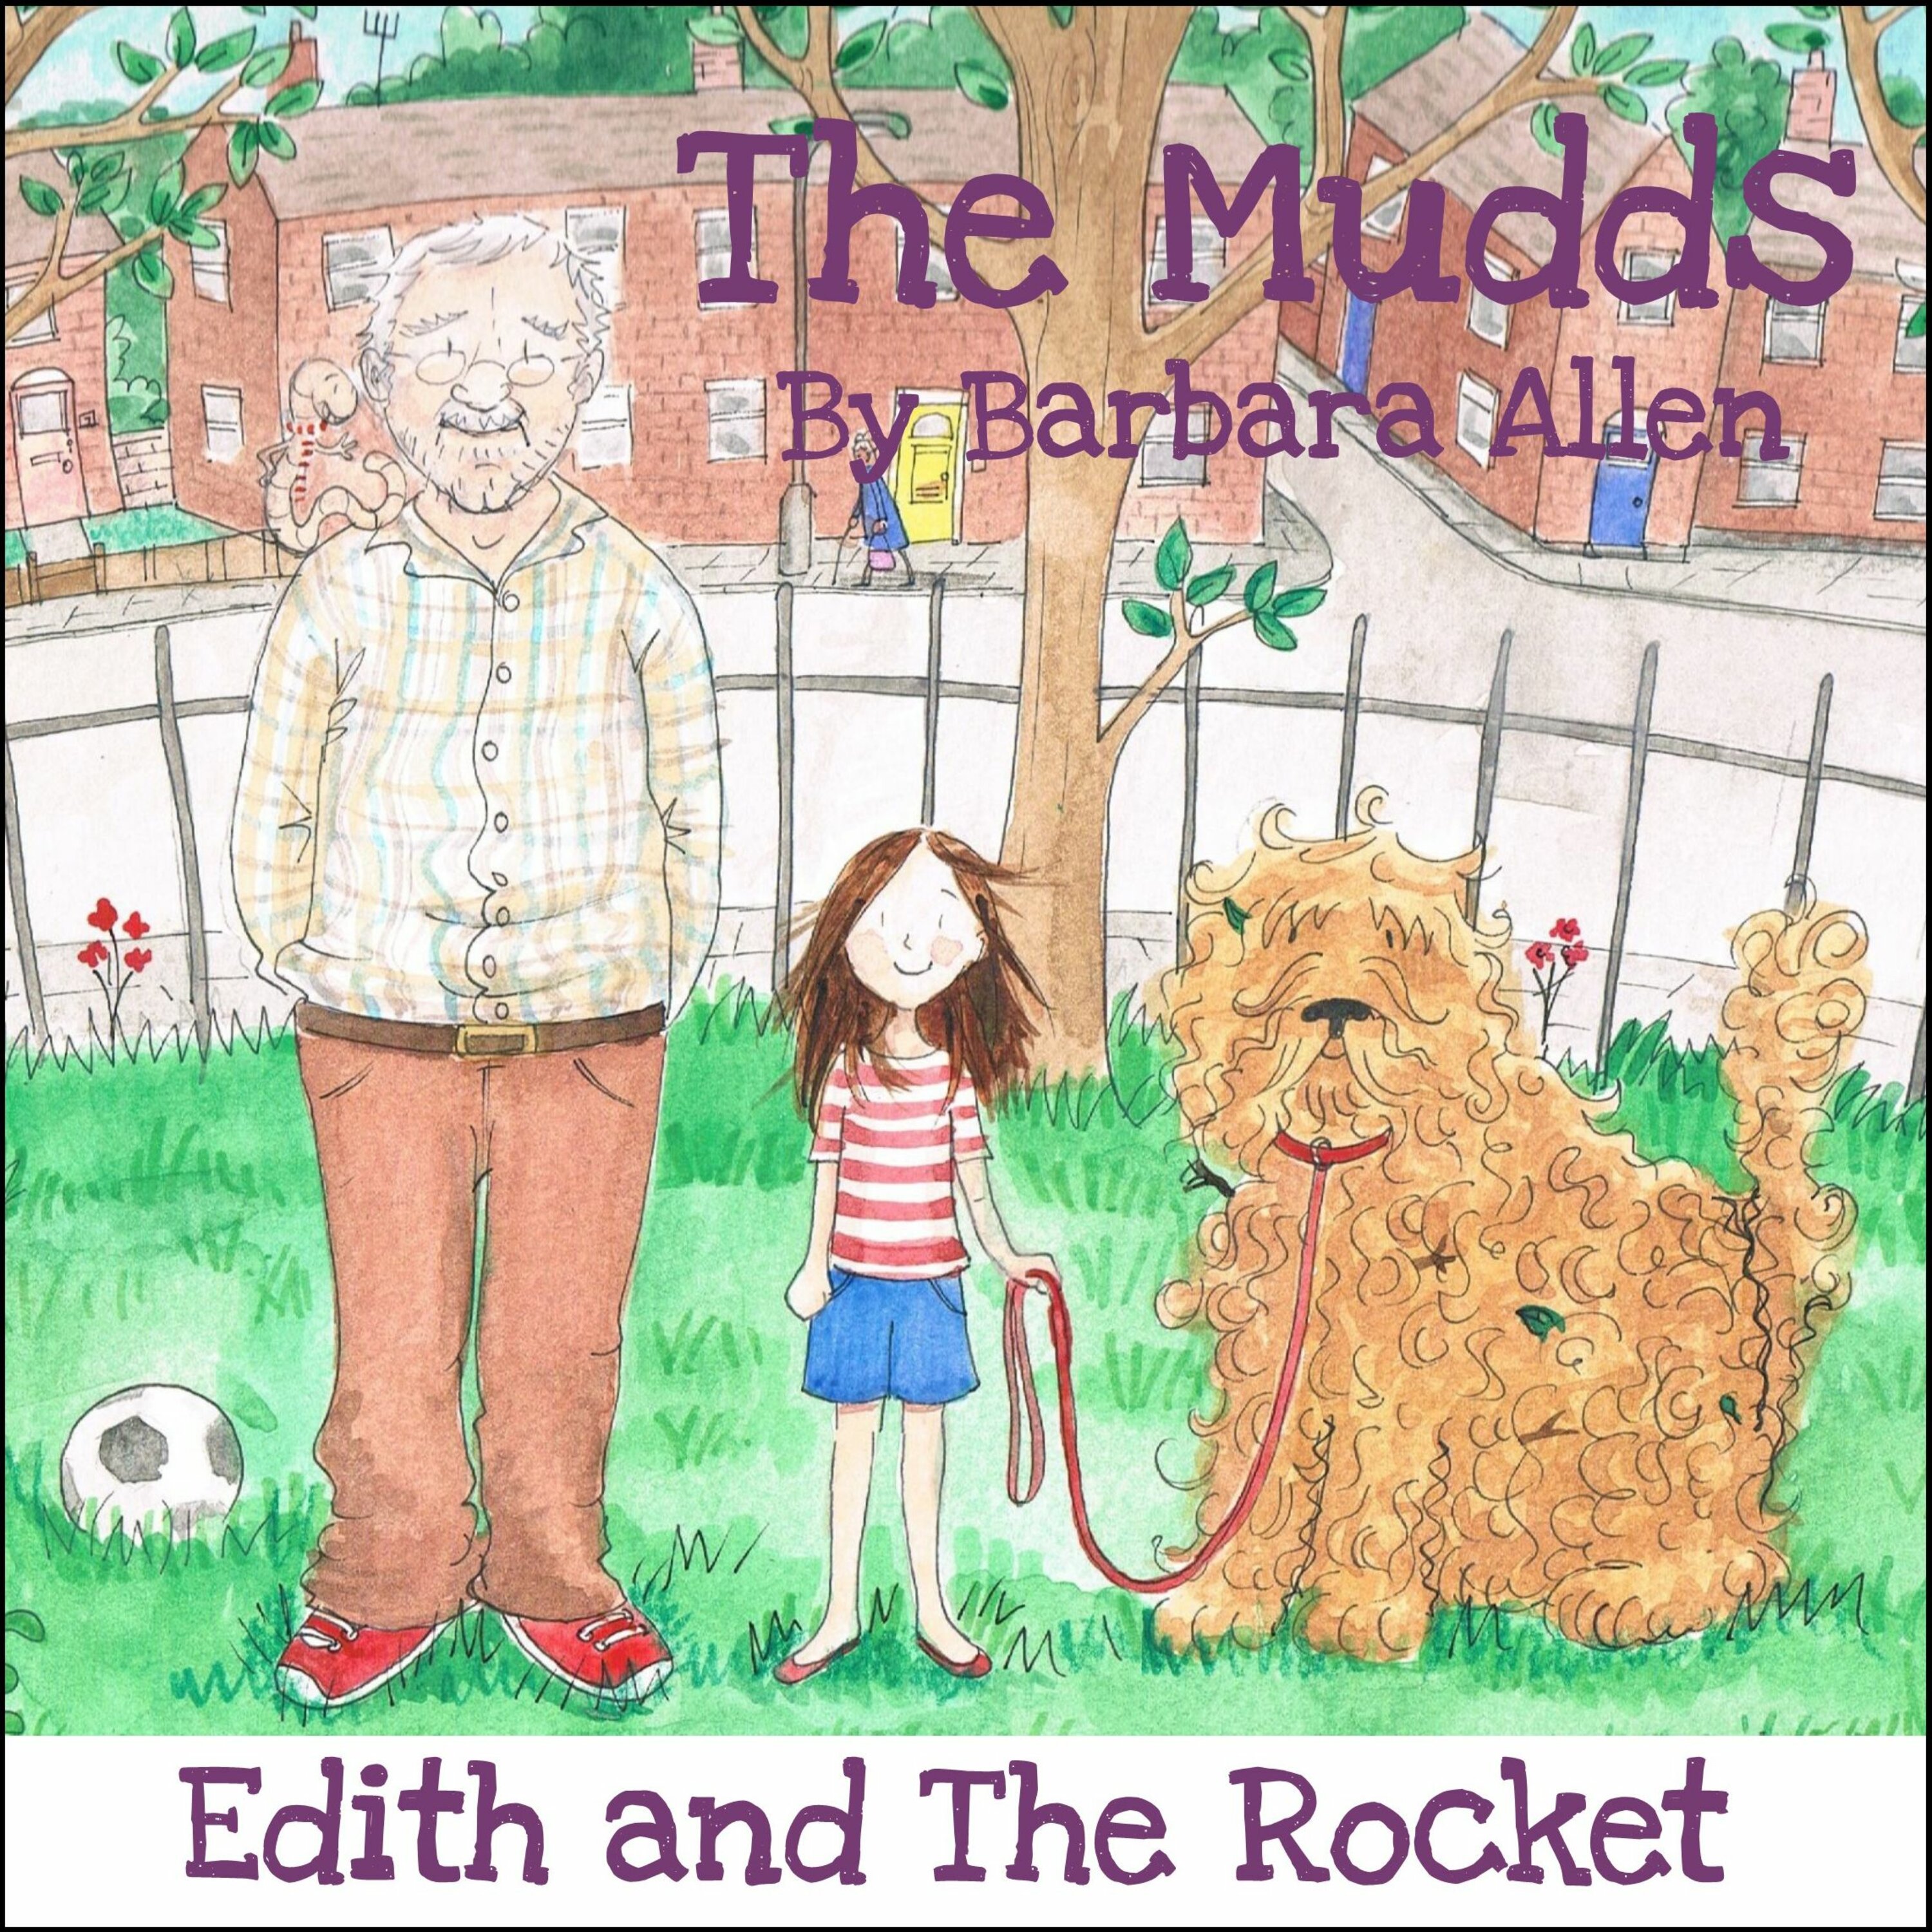 Edith and the Rocket